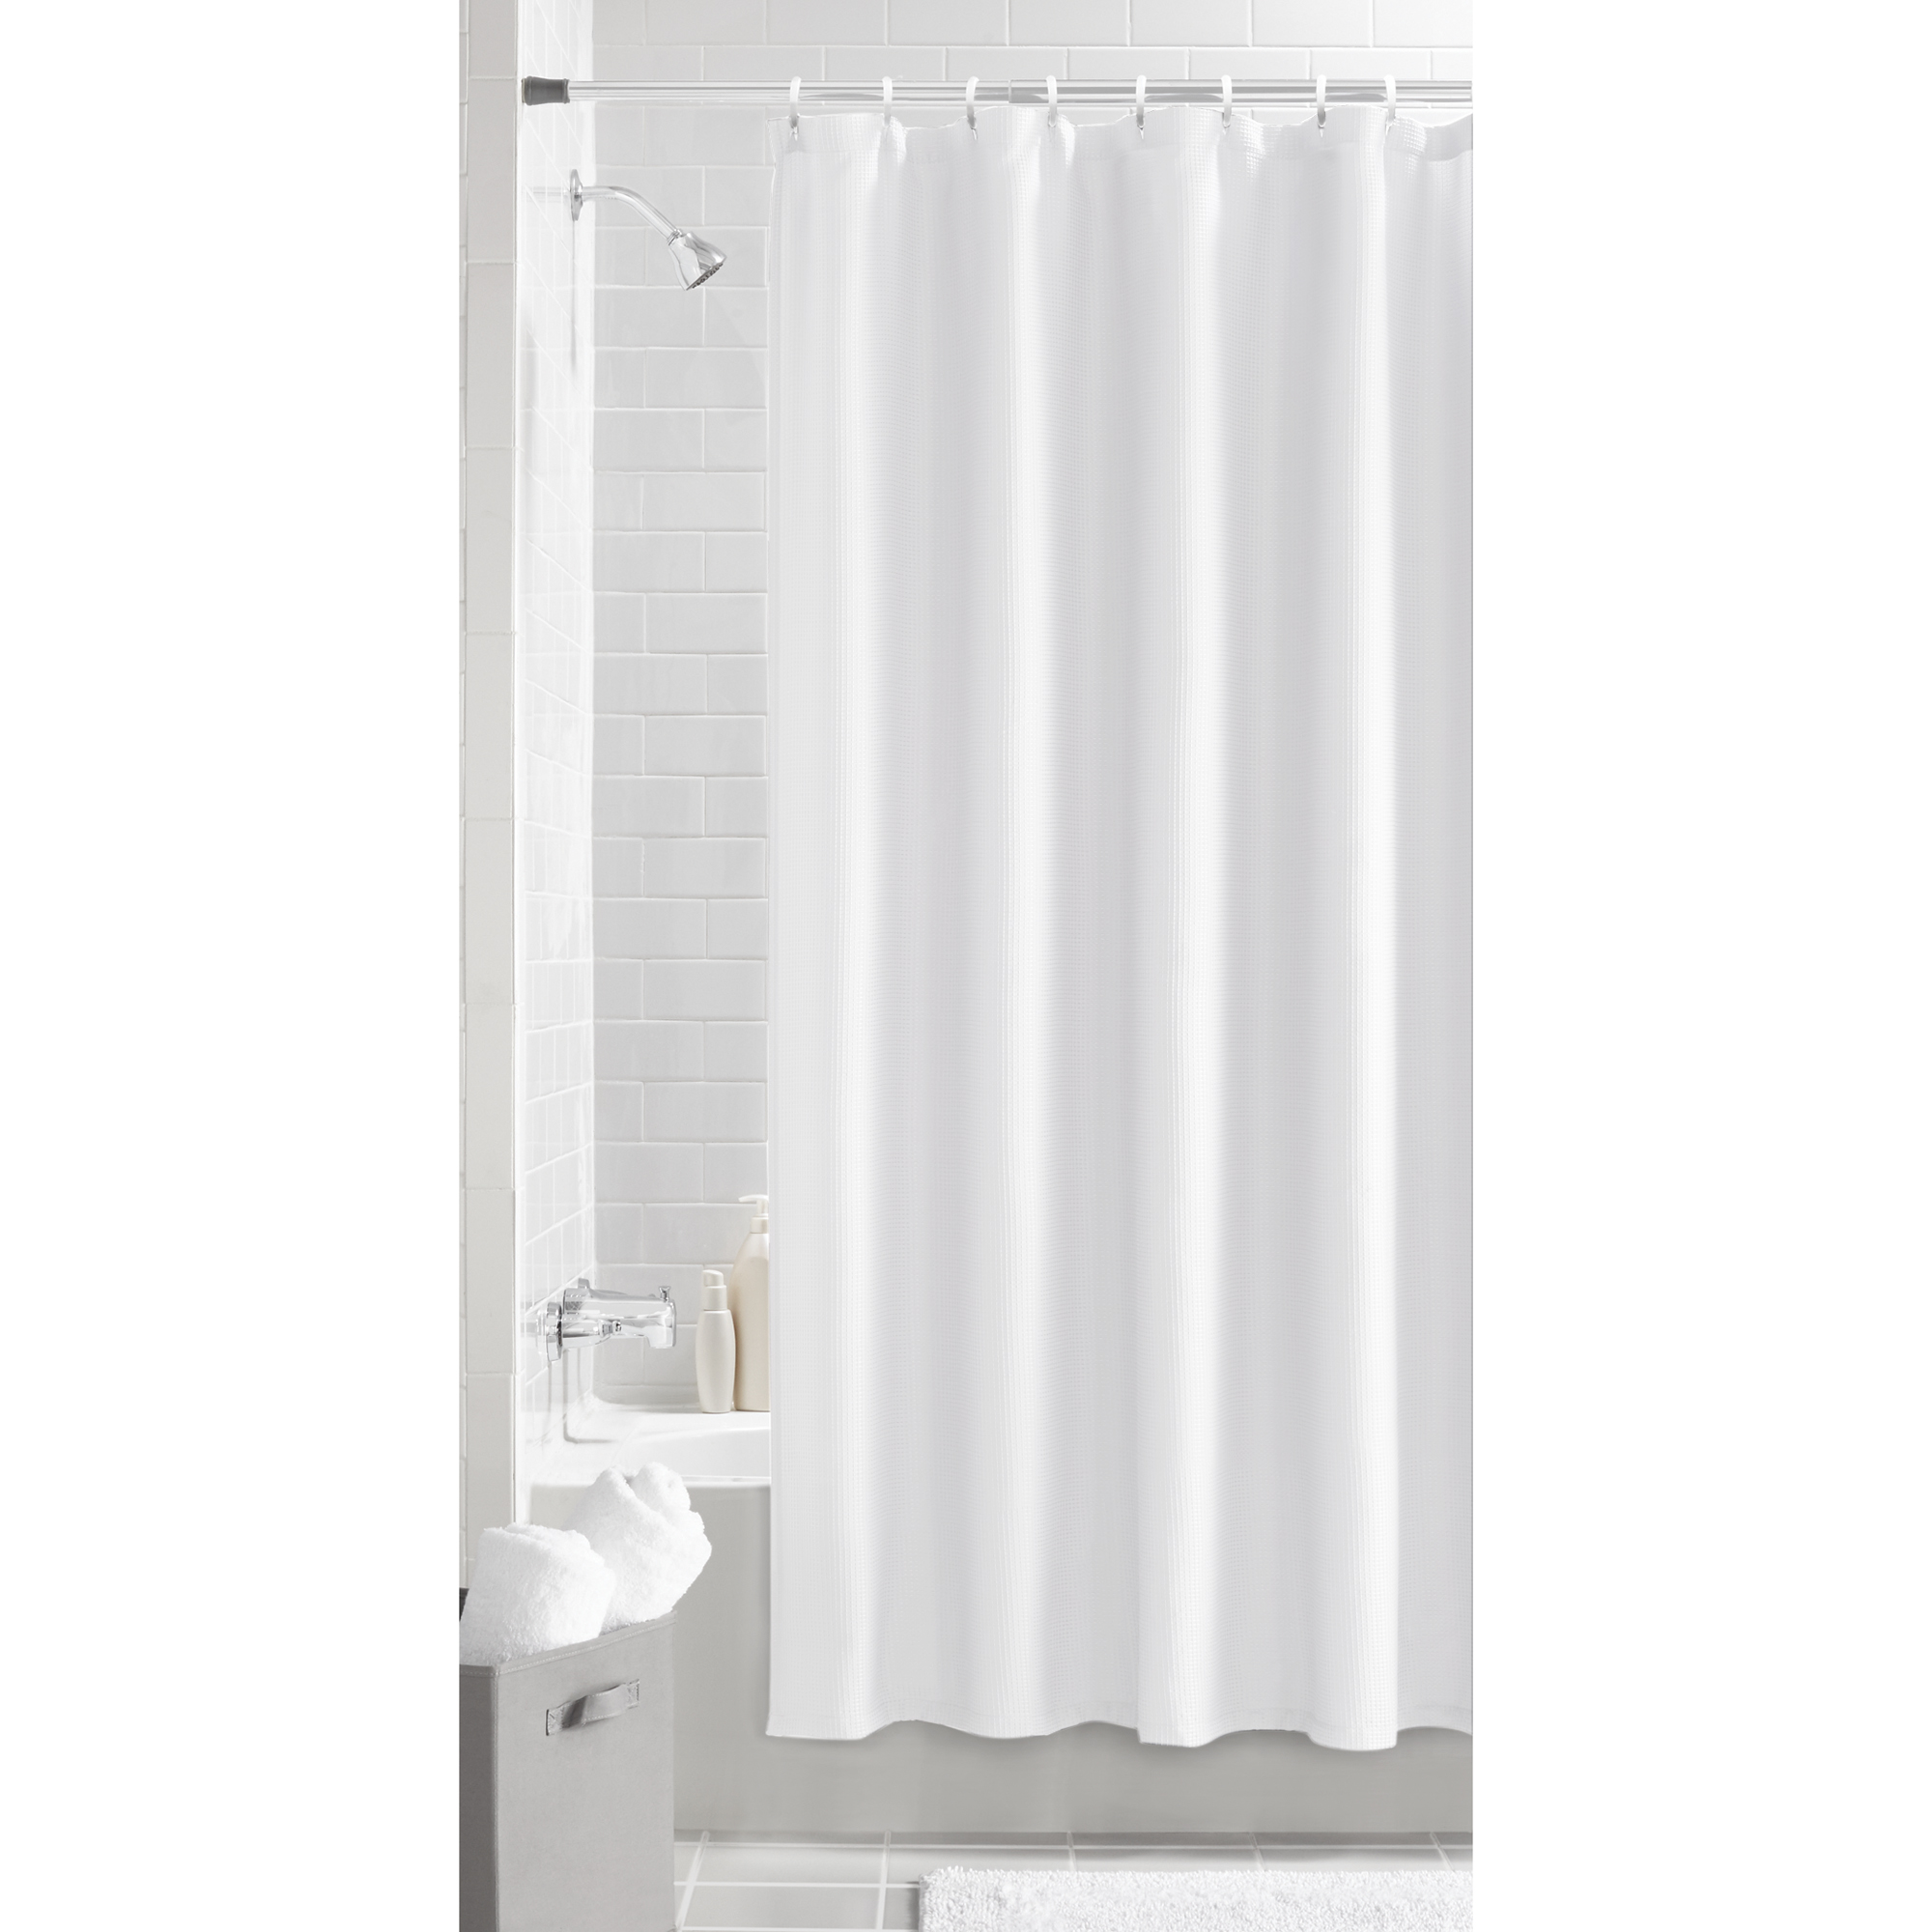 White Fabric Shower Curtain, 70" x 72", Mainstays Classic Waffle Weave Design - image 1 of 5